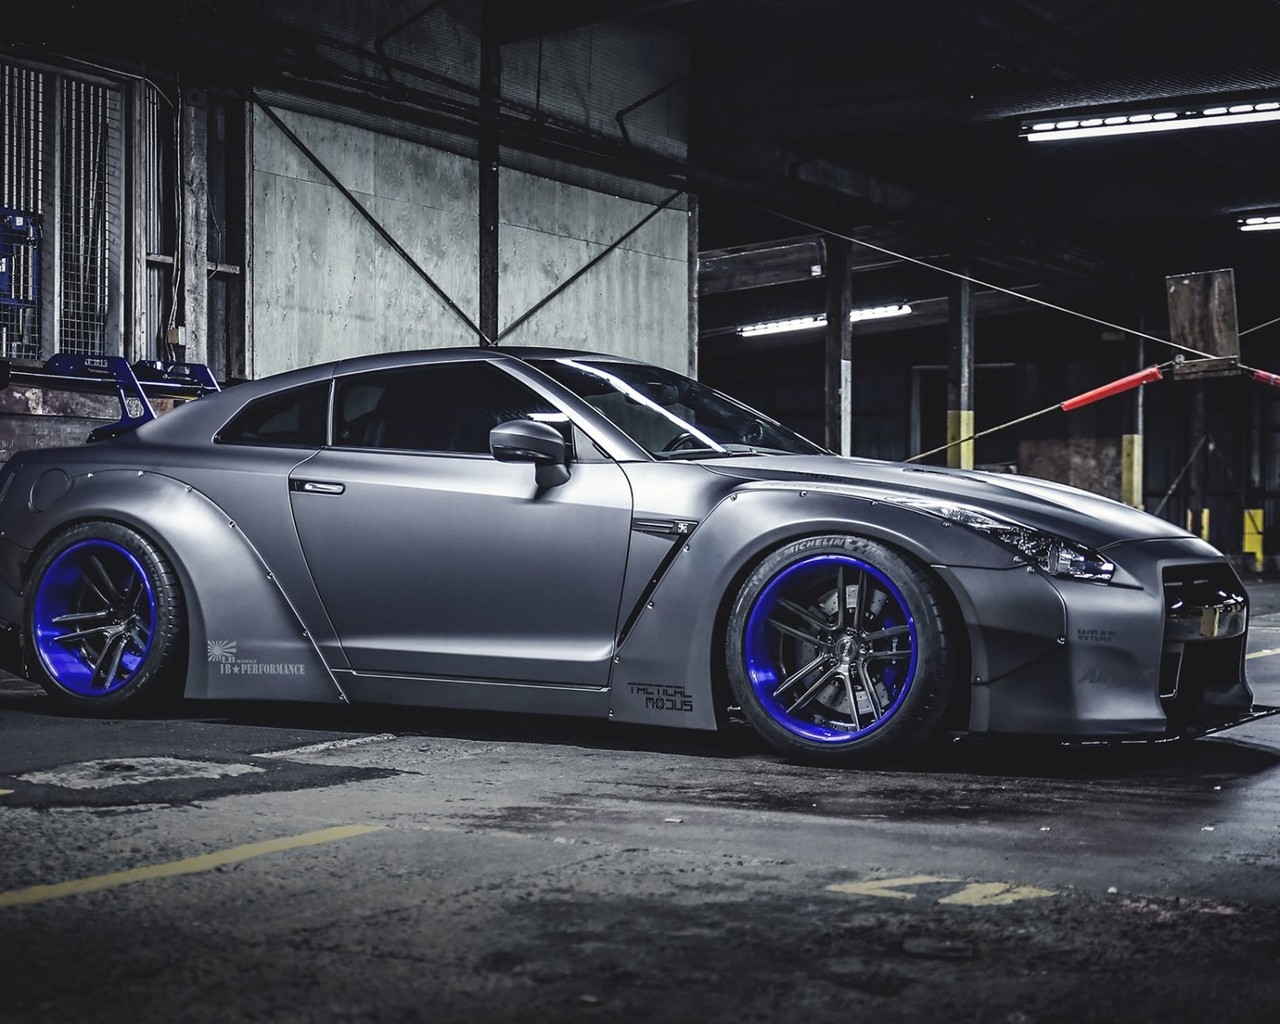 Lovely Nissan GT-R Liberty Walk for 1280 x 1024 resolution